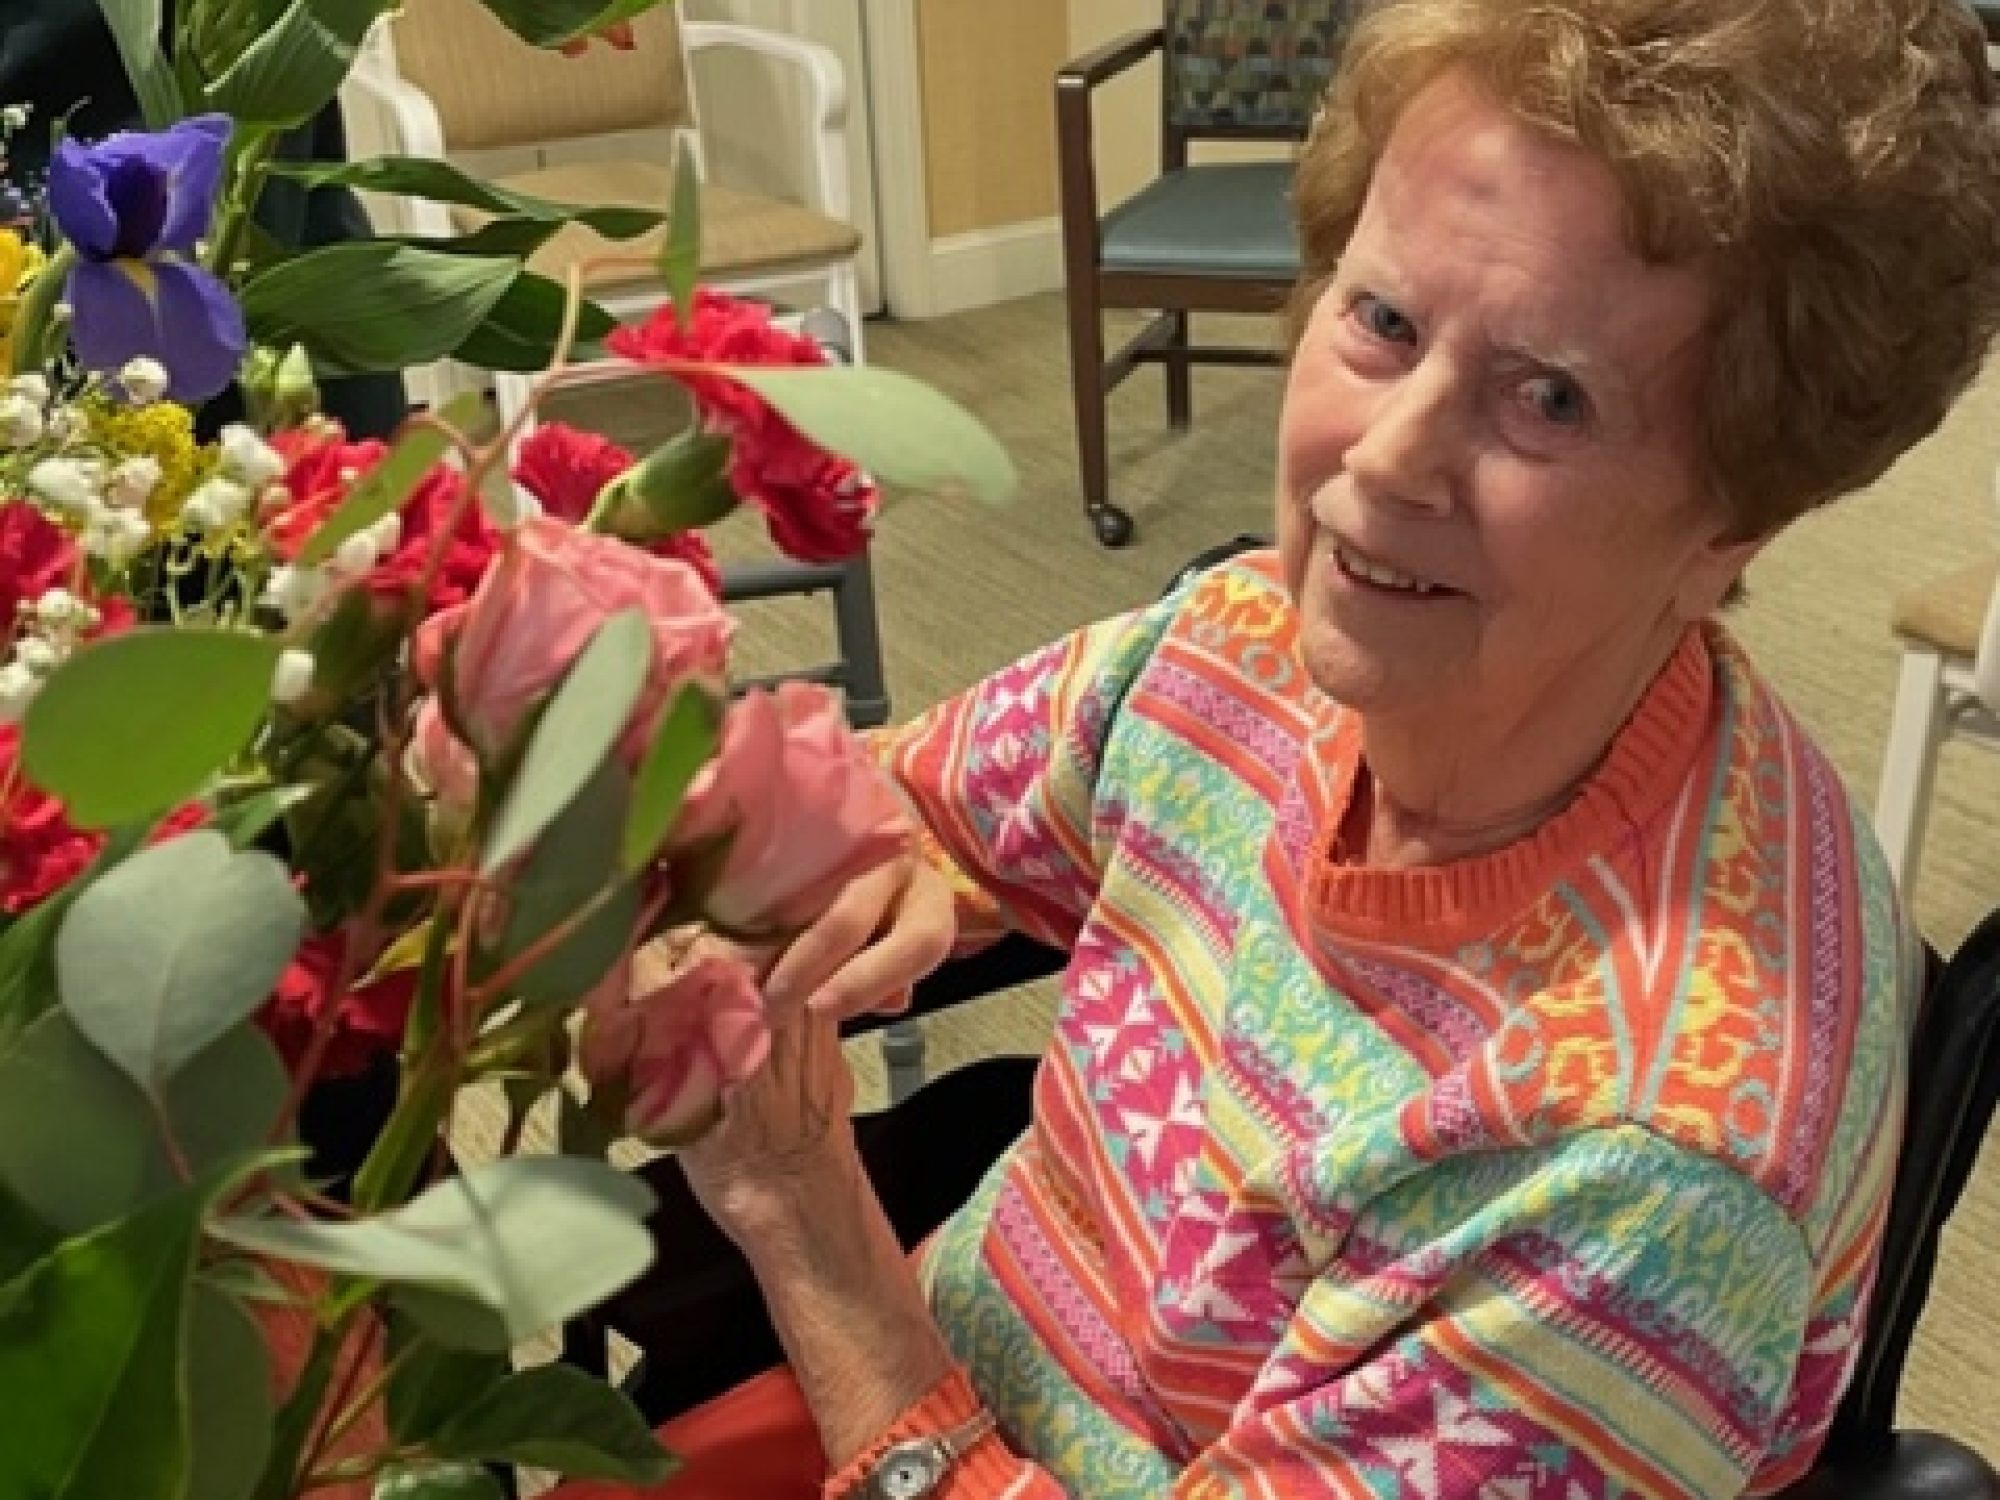 Thanks to the generosity of Trader Joe’s, residents on our north shore campus can enjoy a breath of springtime in the middle of winter. Trader Joe’s regularly donates fresh flowers to our campus which turn into fun activities for the residents. Here, Legacy residents get to enjoy flower arranging on a cold winter day.